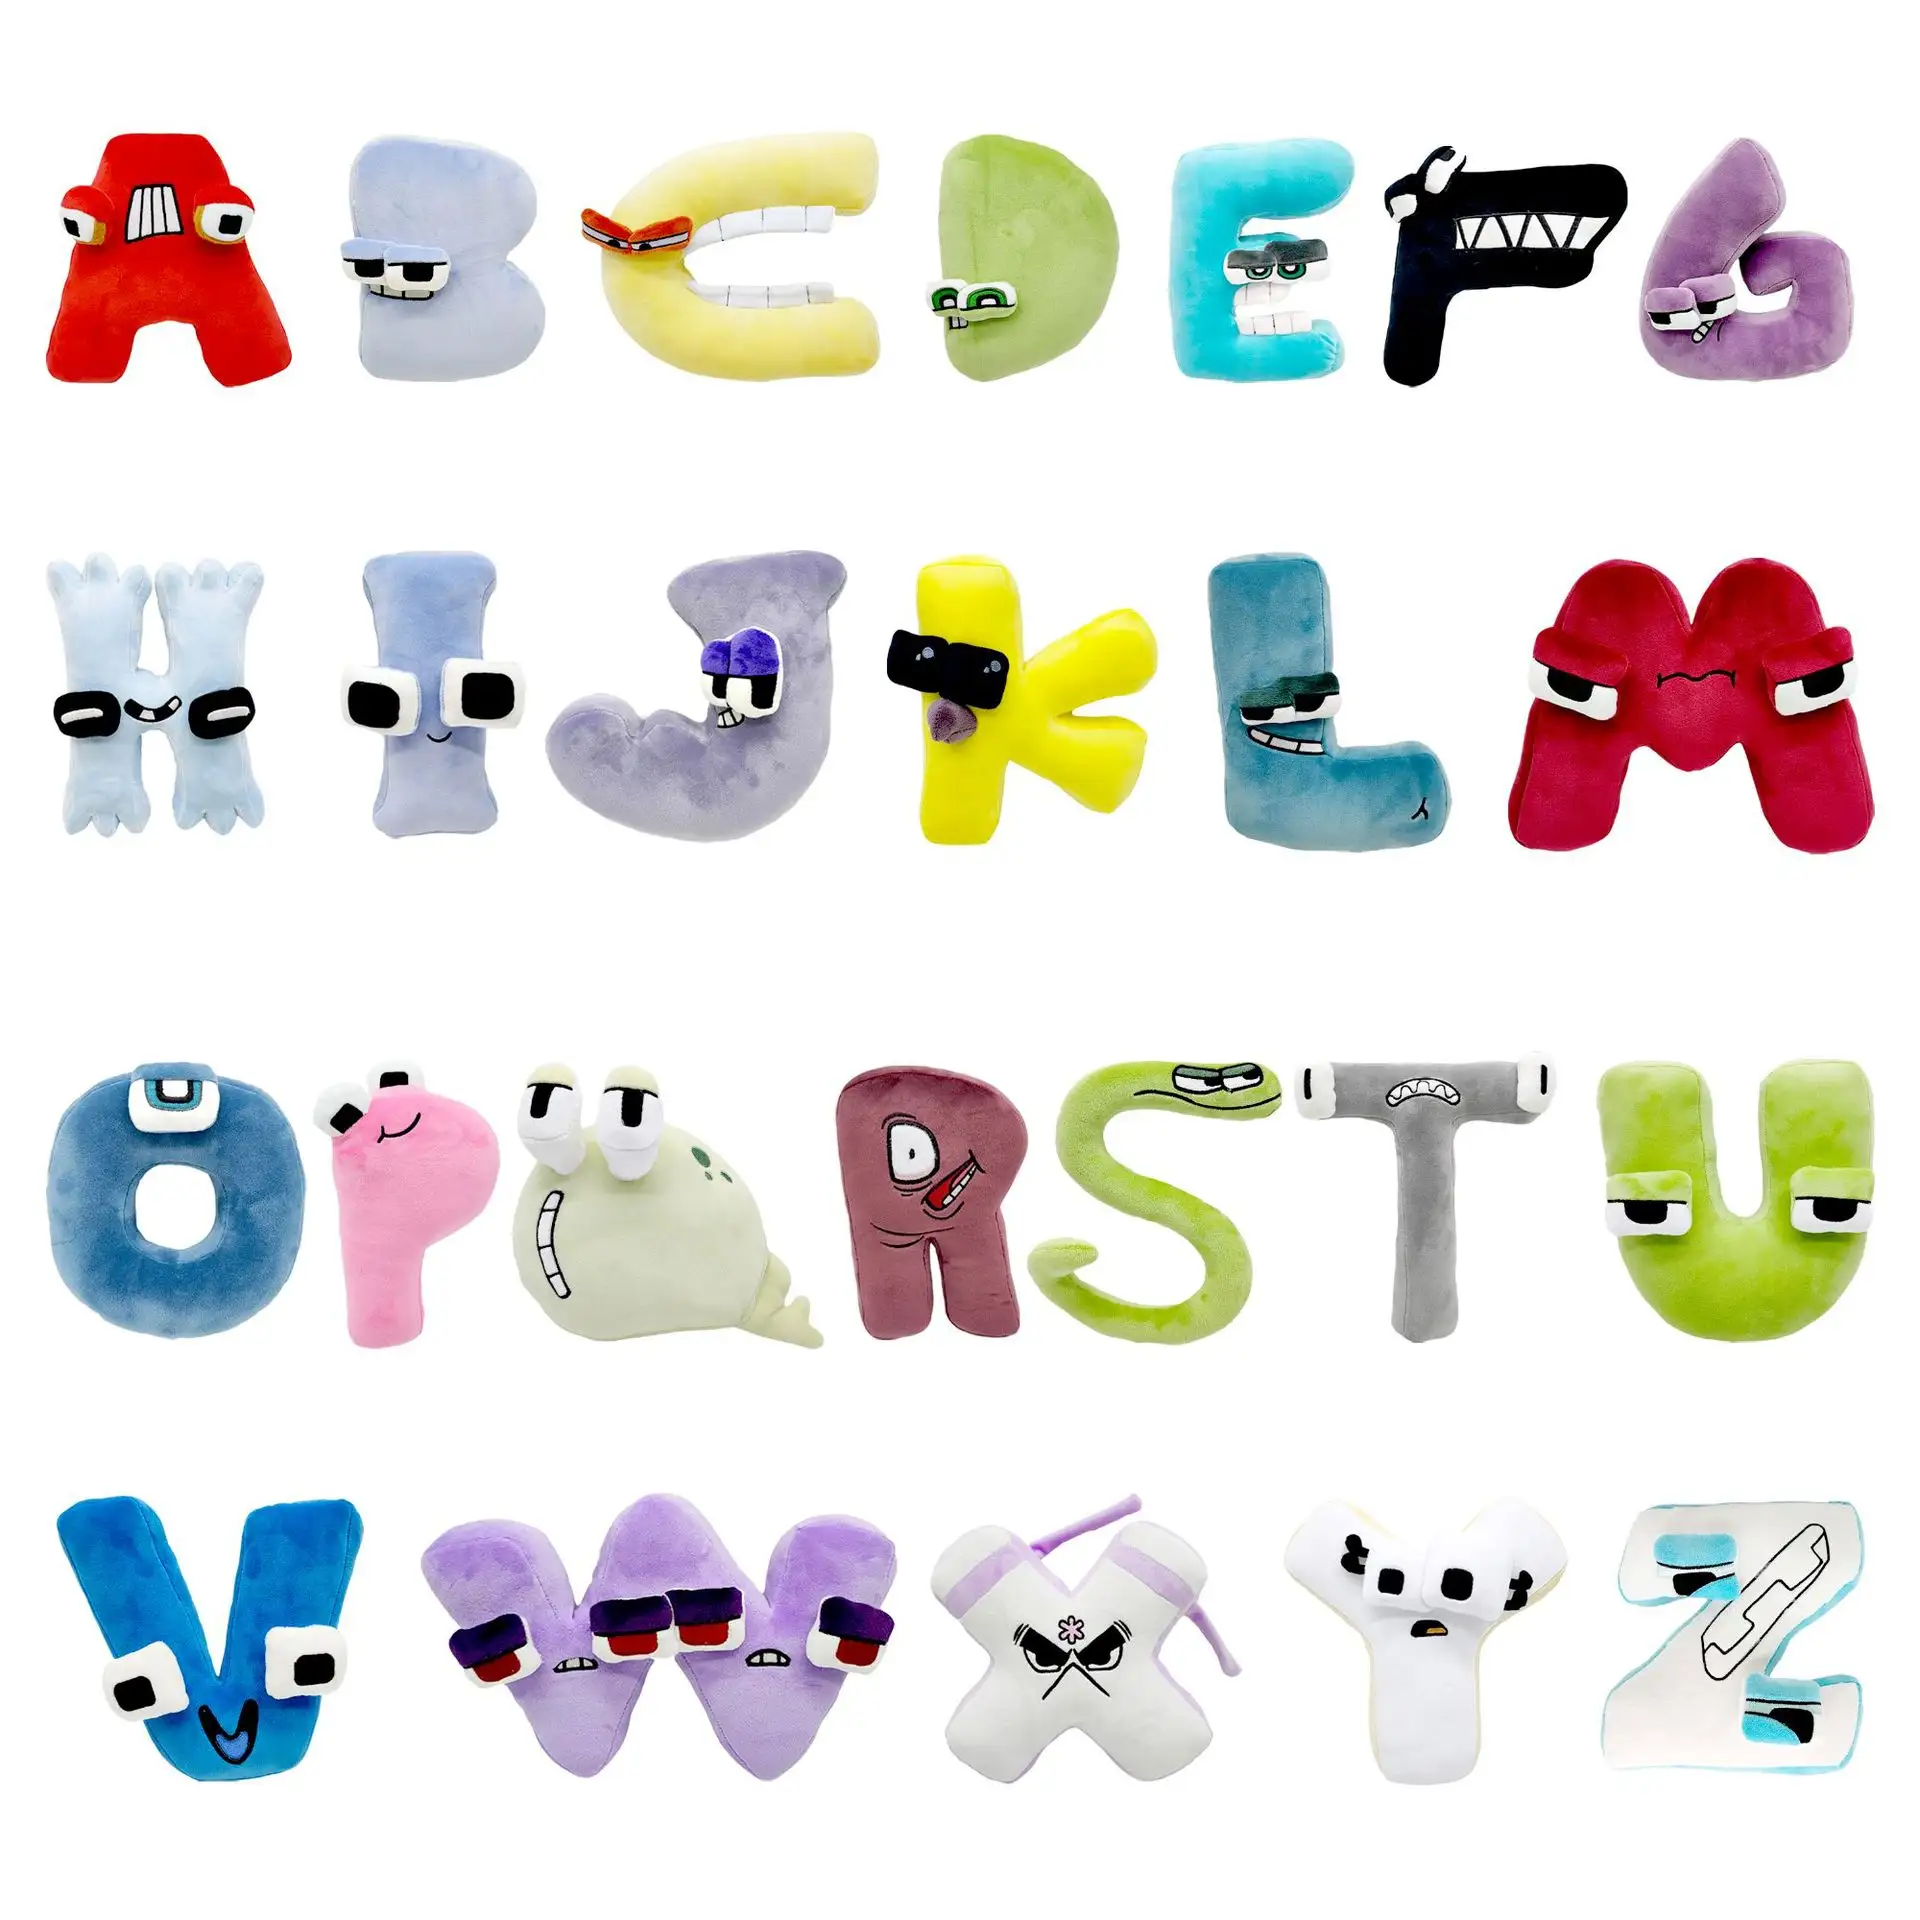 Newest colorful ABCD alphabet plush letter toys, cute A to Z letters lore plush stuffed dolls